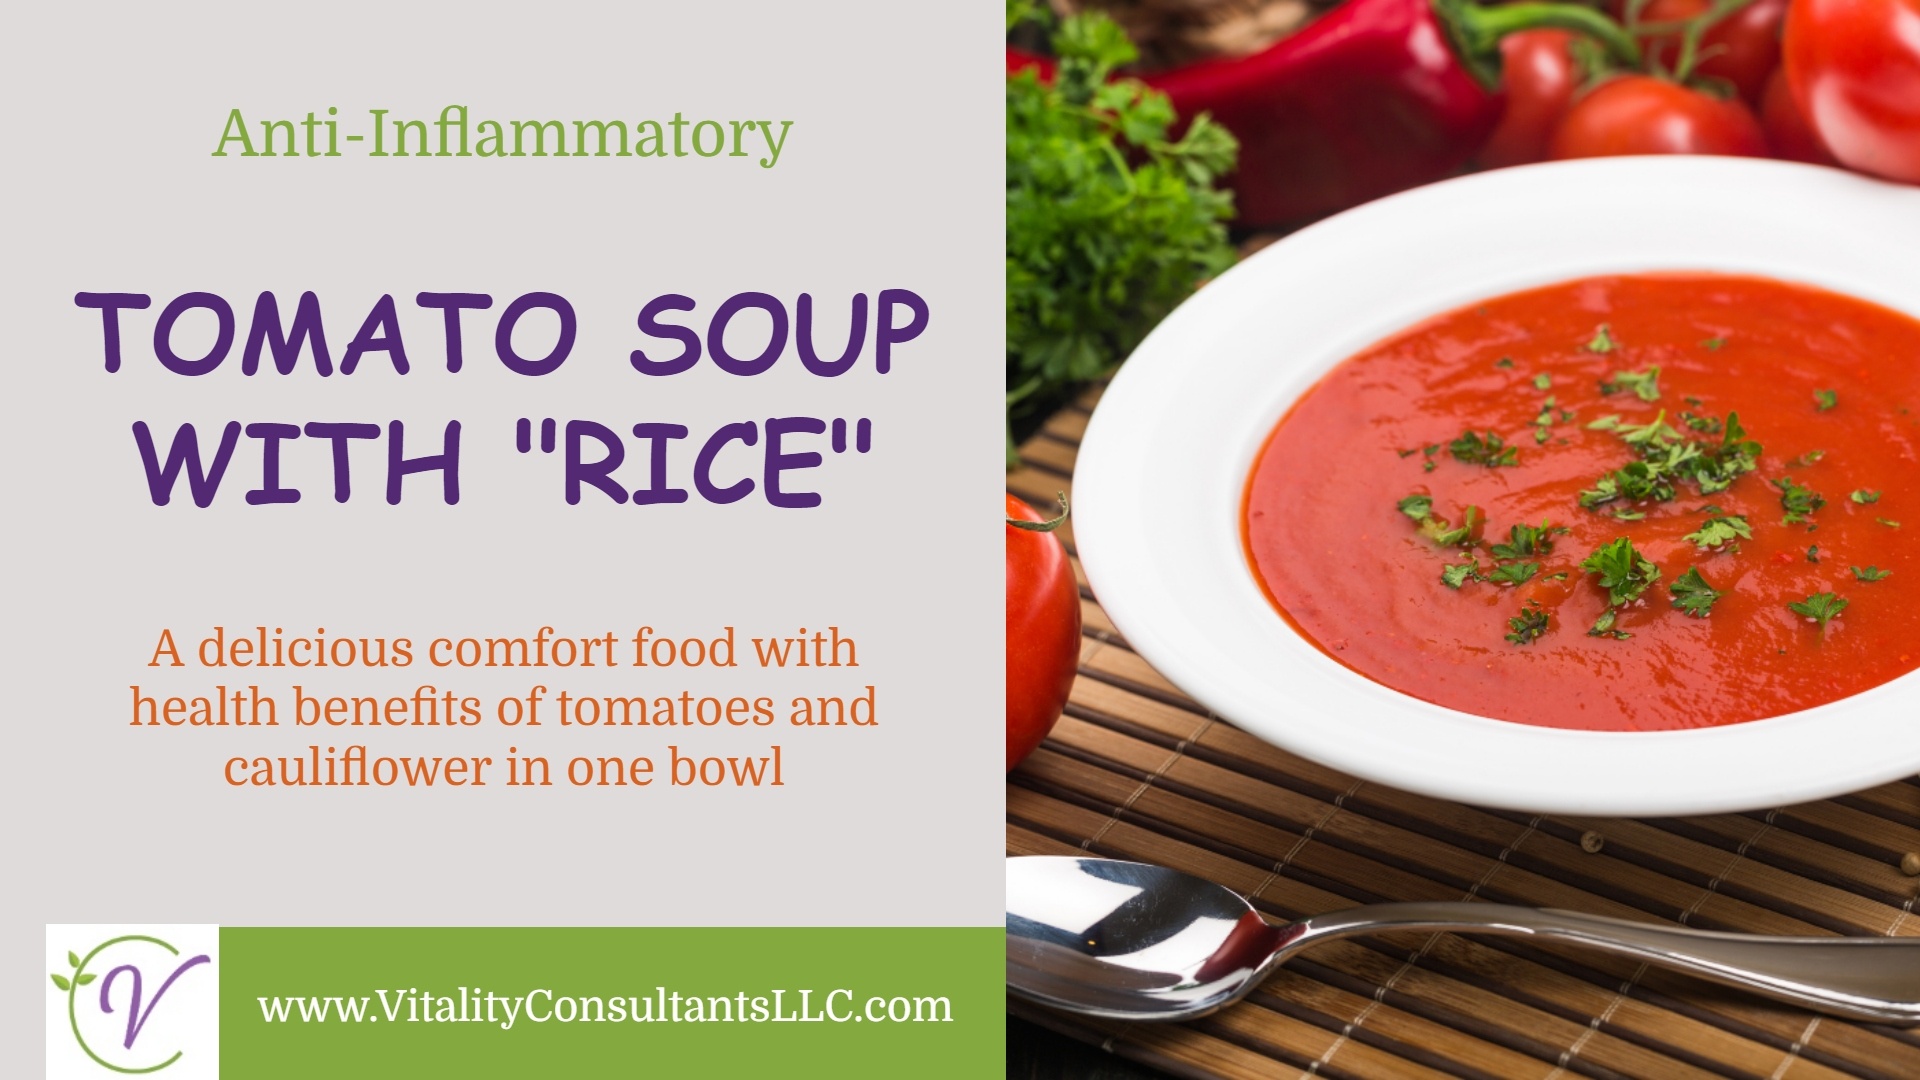 Tomato Soup with "Rice"